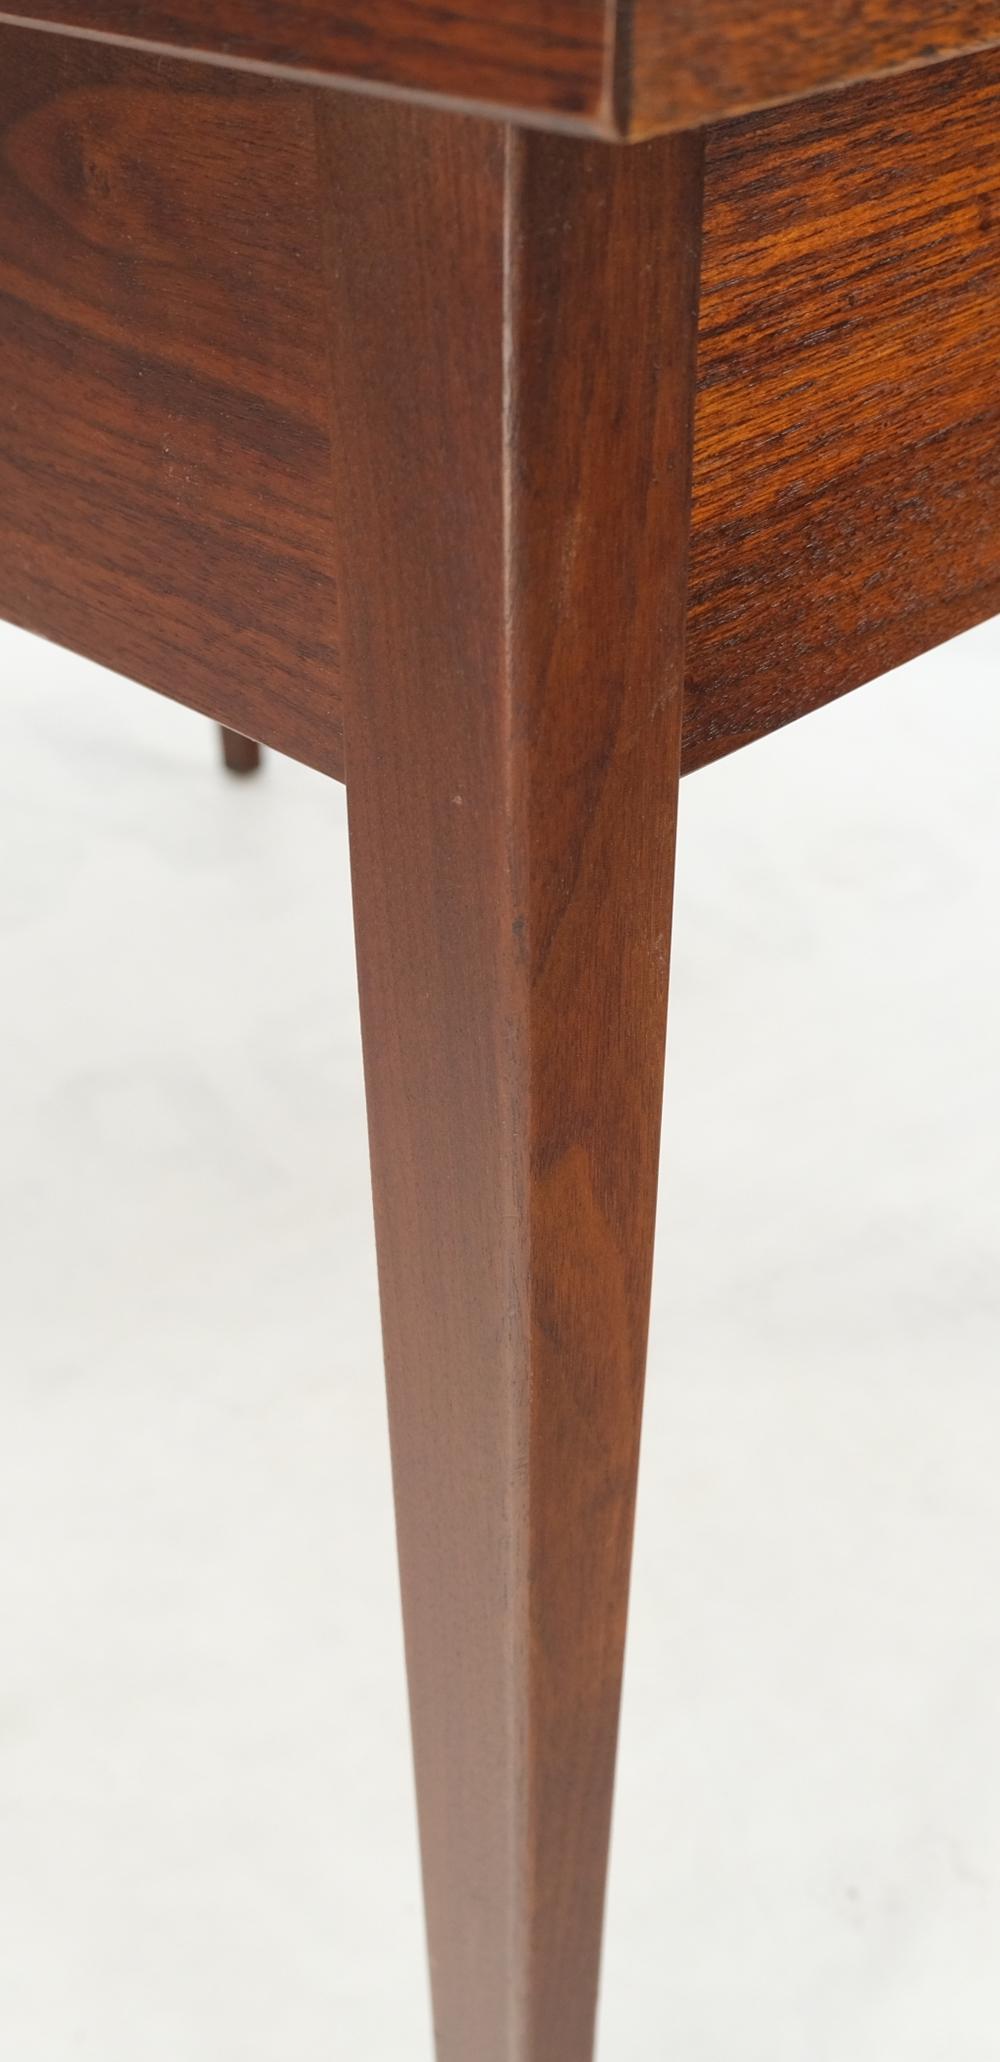 Knoll Risom One Drawer Oiled Walnut Tapered Legs End Side Table Stand Decor Mint In Good Condition For Sale In Rockaway, NJ